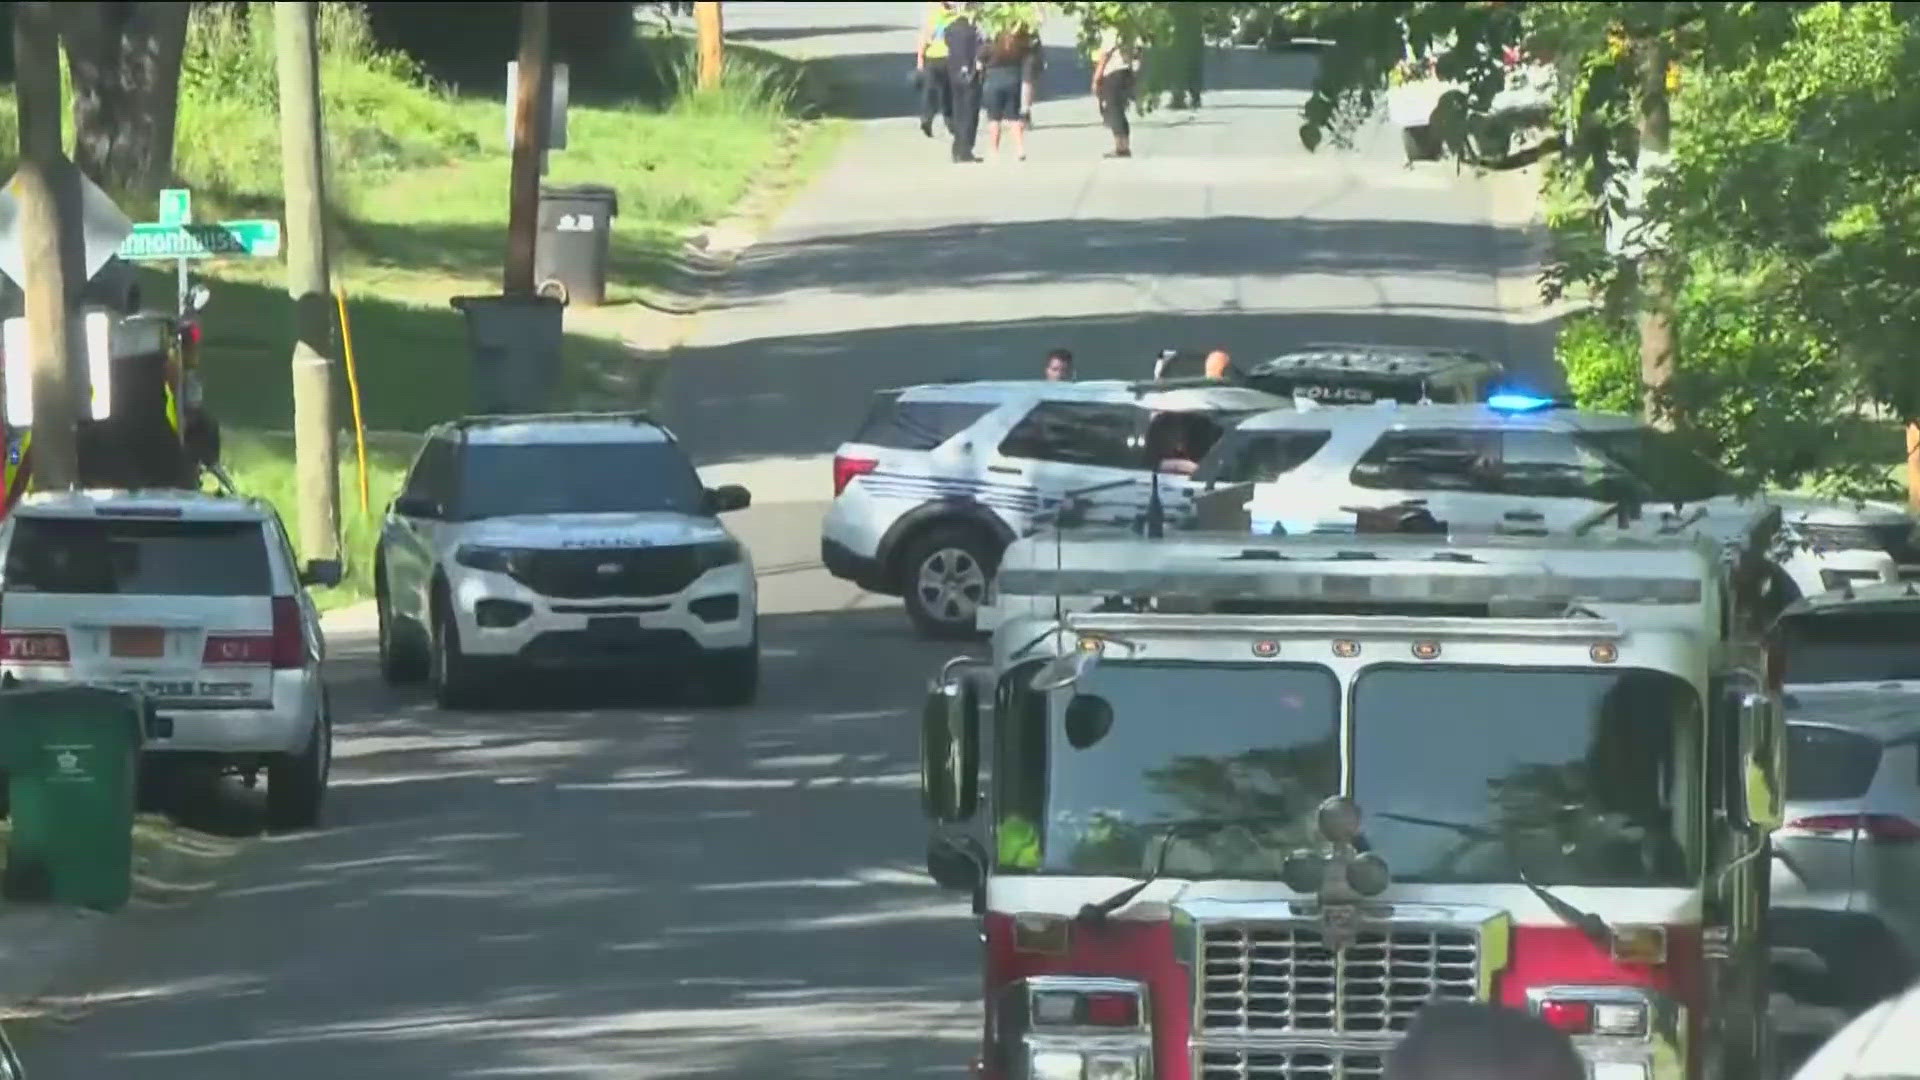 Law enforcement officers were working together on a U.S. Marshals Task Force when they were met by "active gunfire."